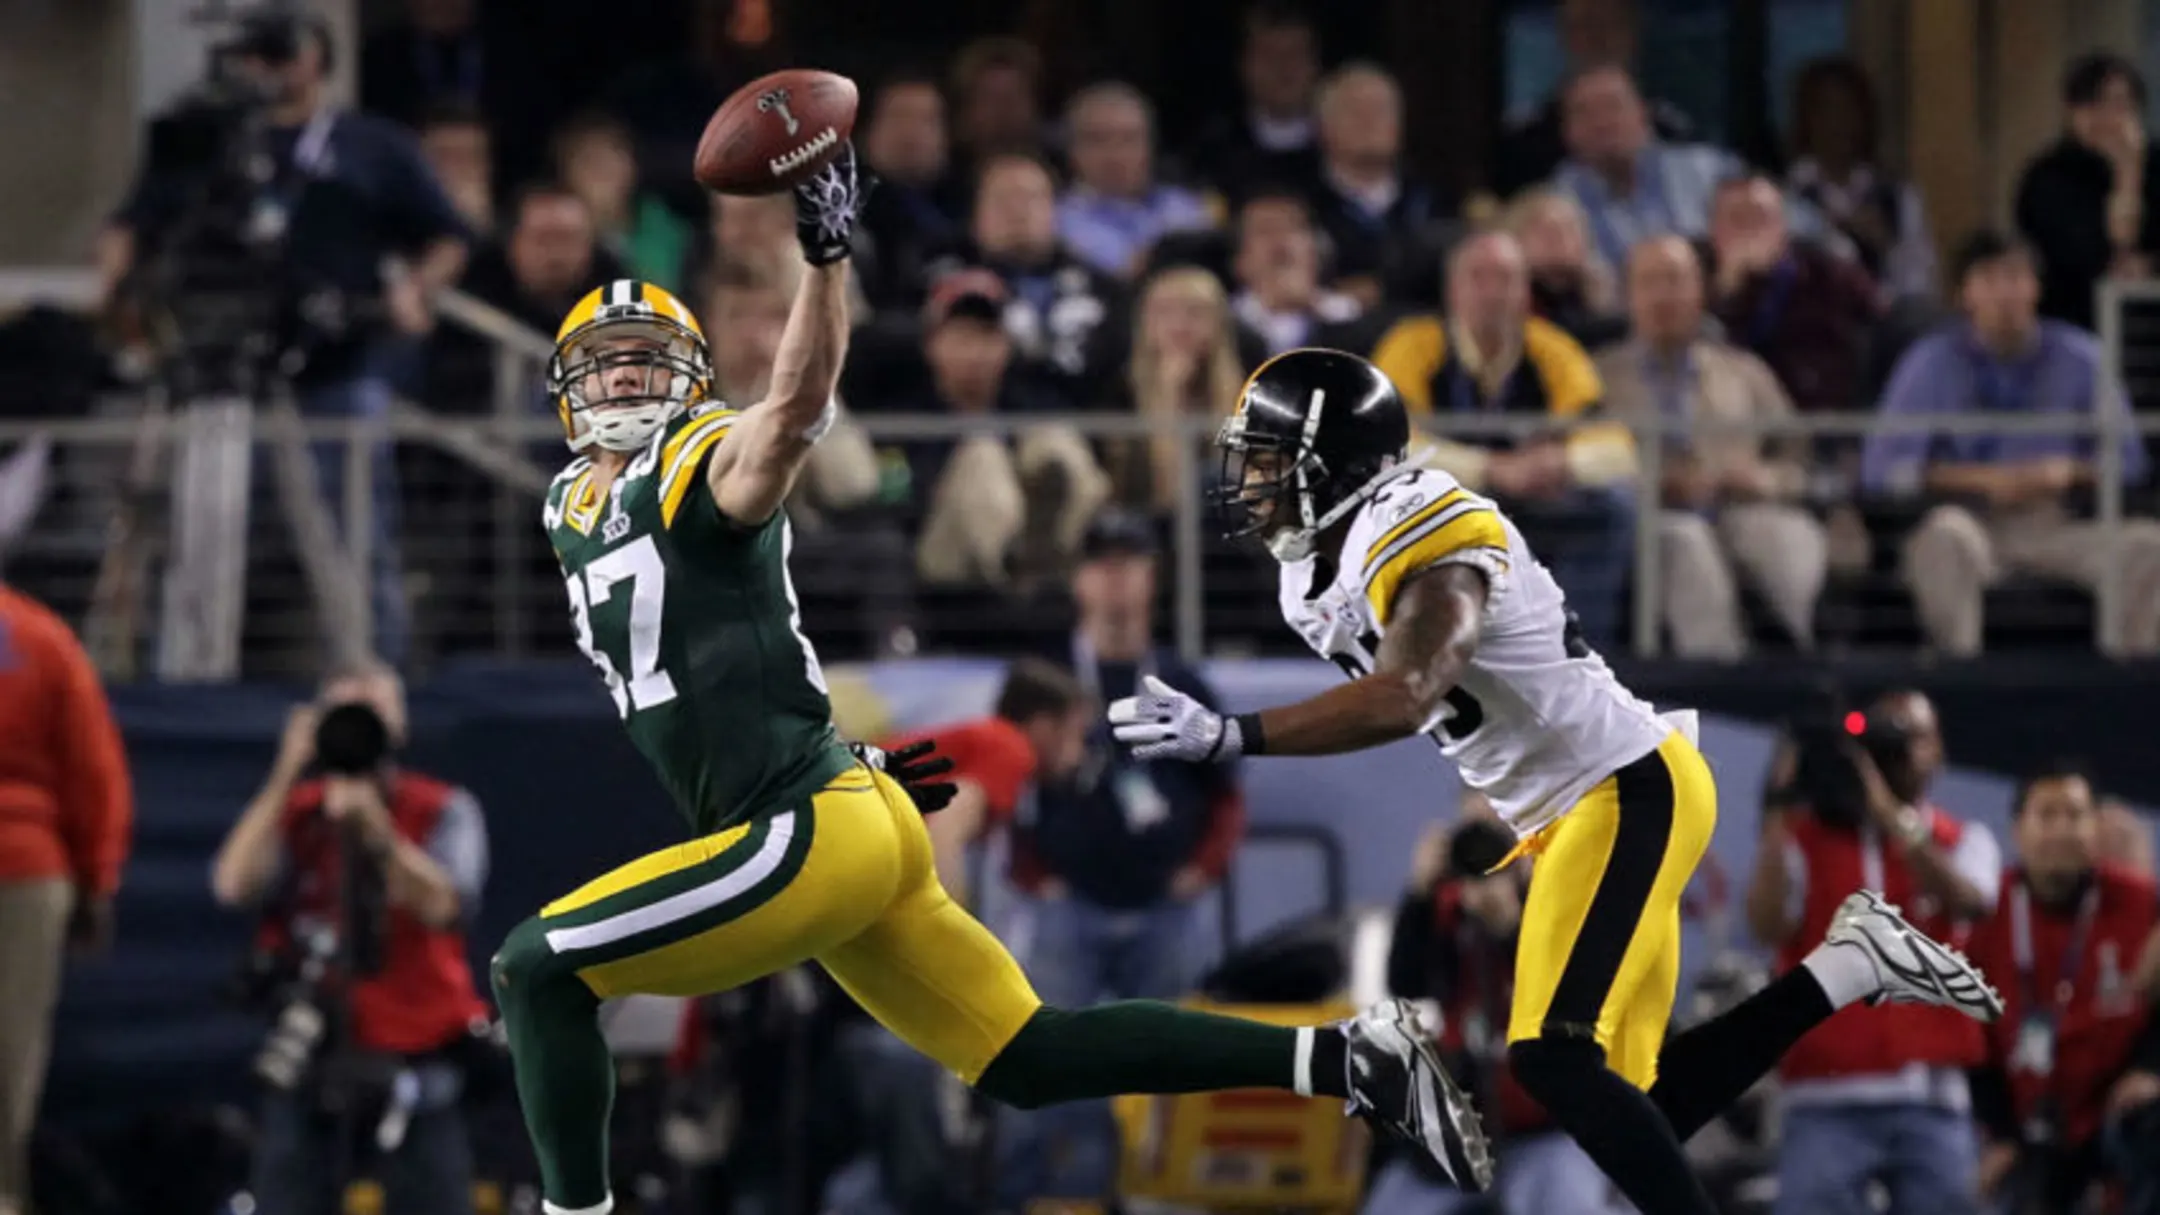 Former Pittsburgh Steelers DB Ryan Clark gets beat by Jordy Nelson in Super Bowl 45 